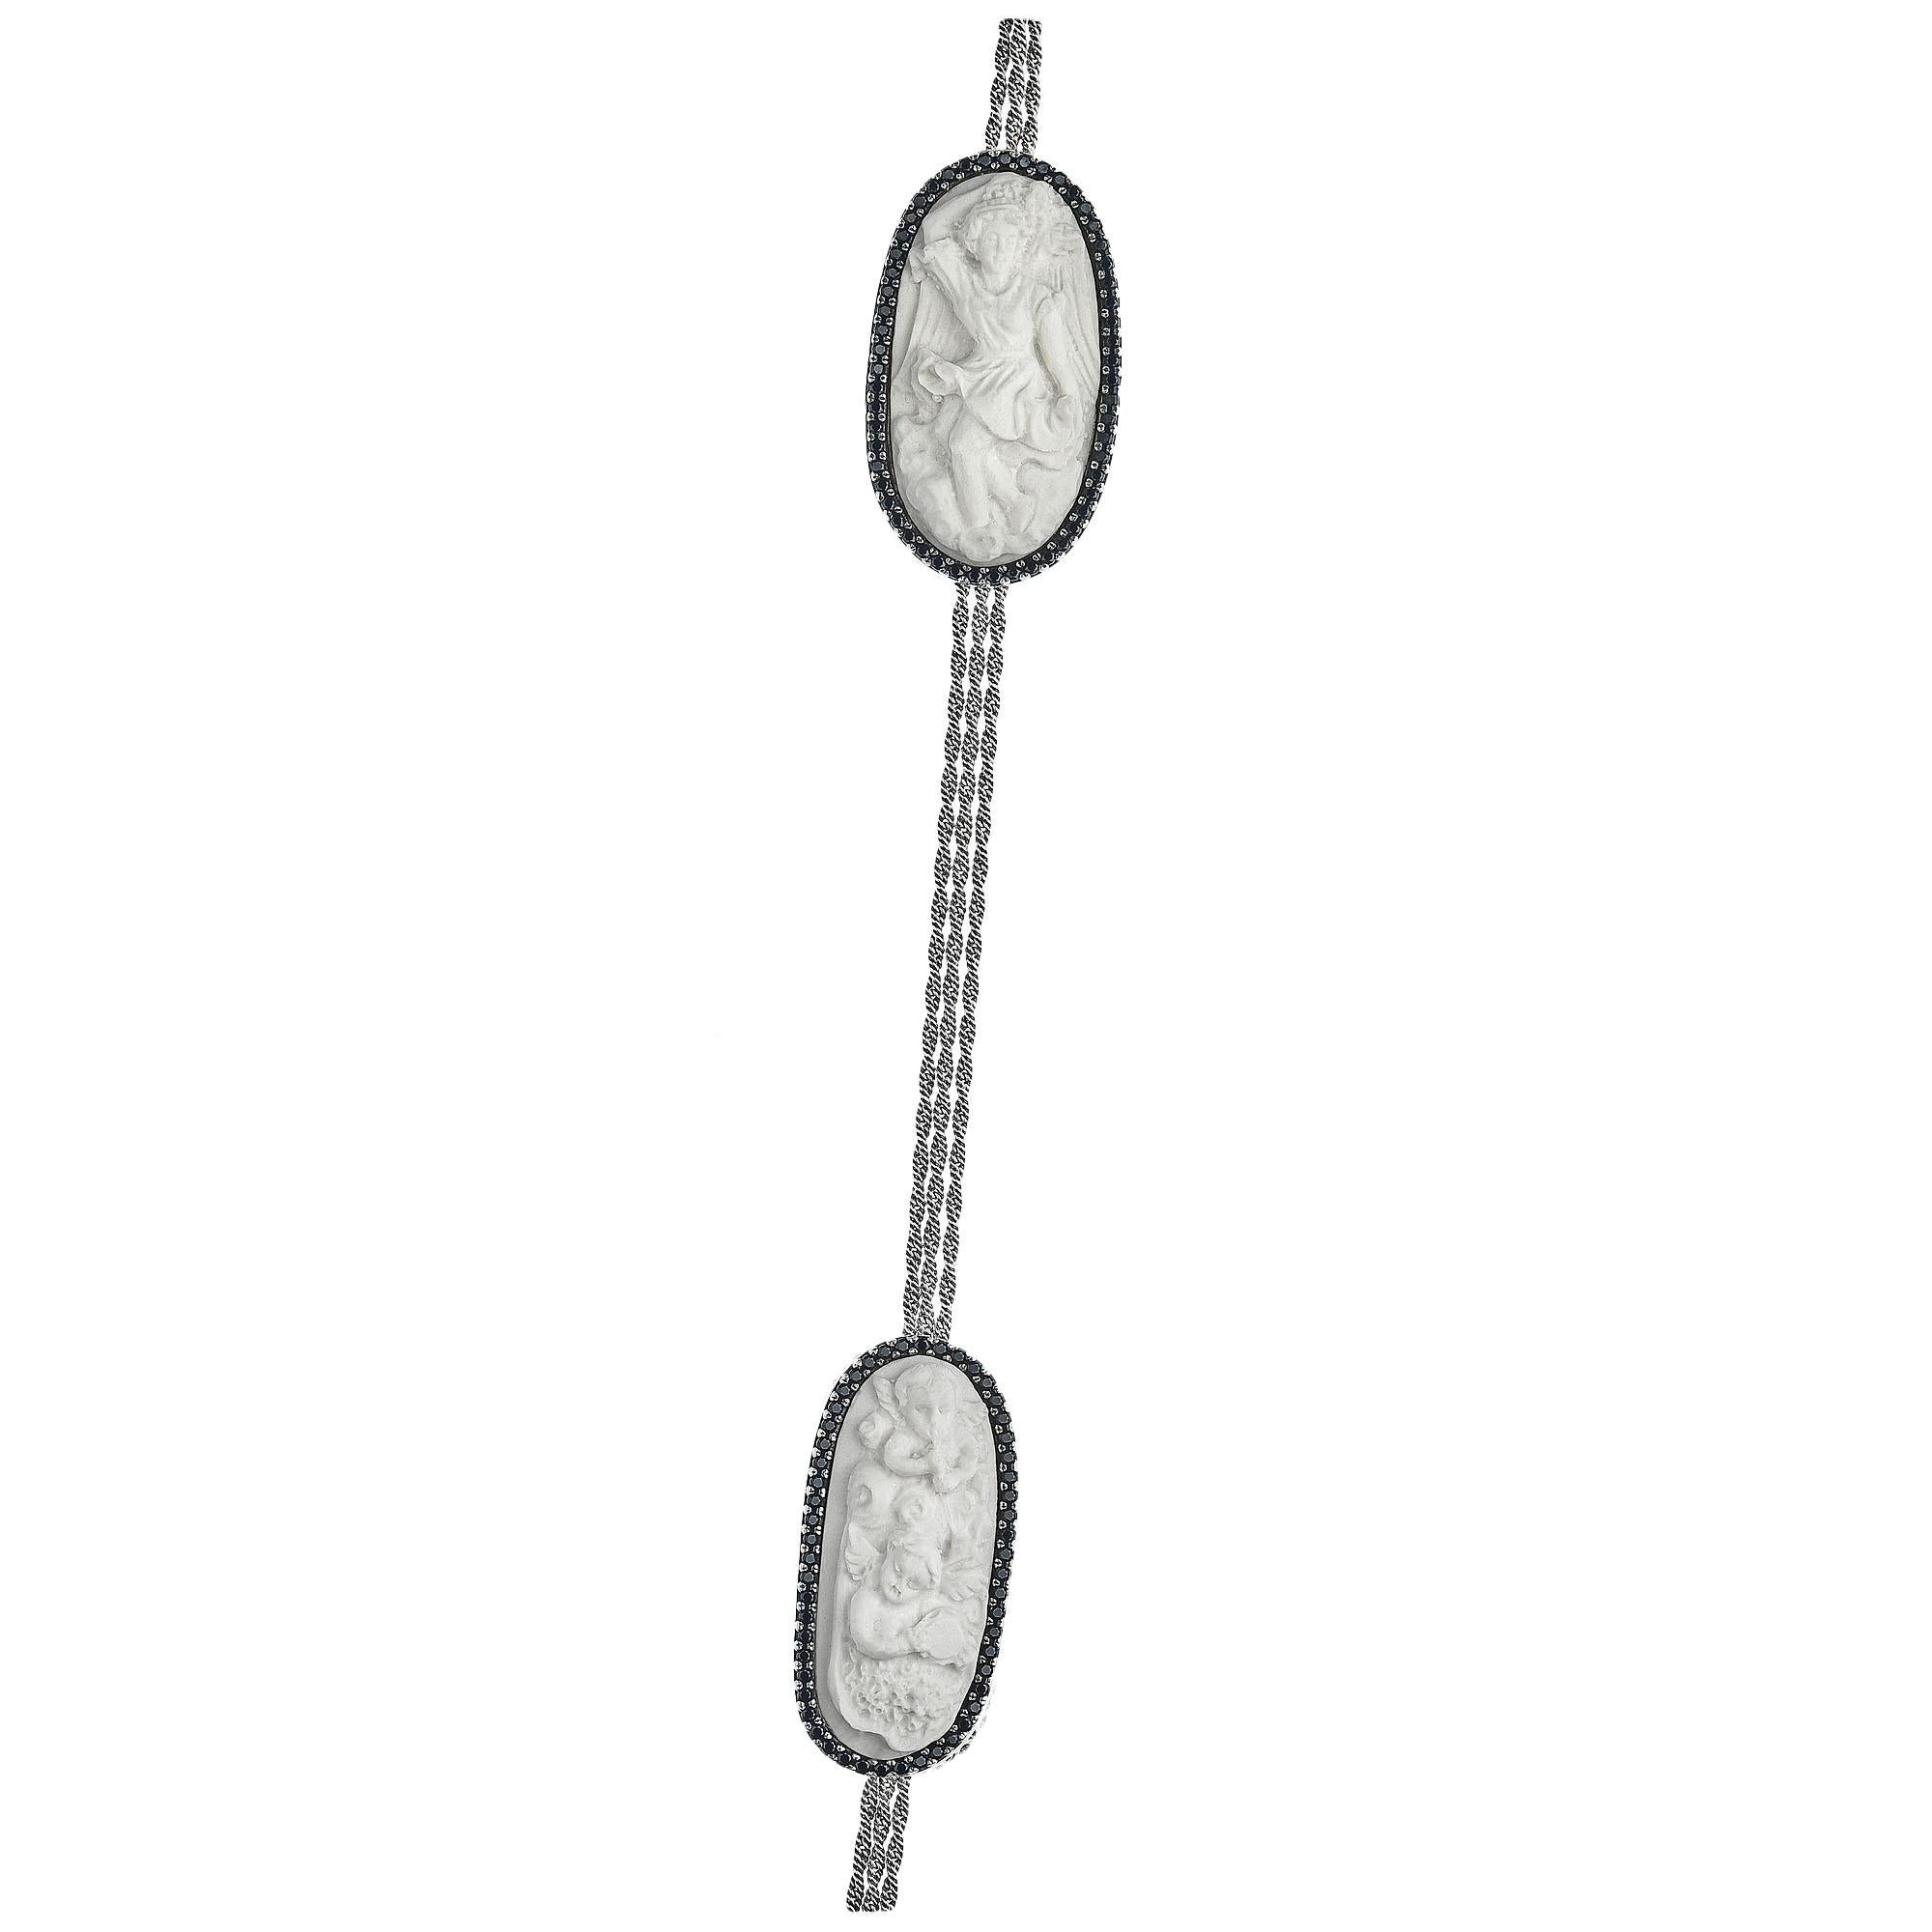 Rhodium Plated Sterling Silver Ruthenium Finish and Fine Porcelain
Handmade in Italy

The beauty of the antique is imbued with a contemporary form for a timeless jewel in this collection. Each piece is unmistakably original, striking, and